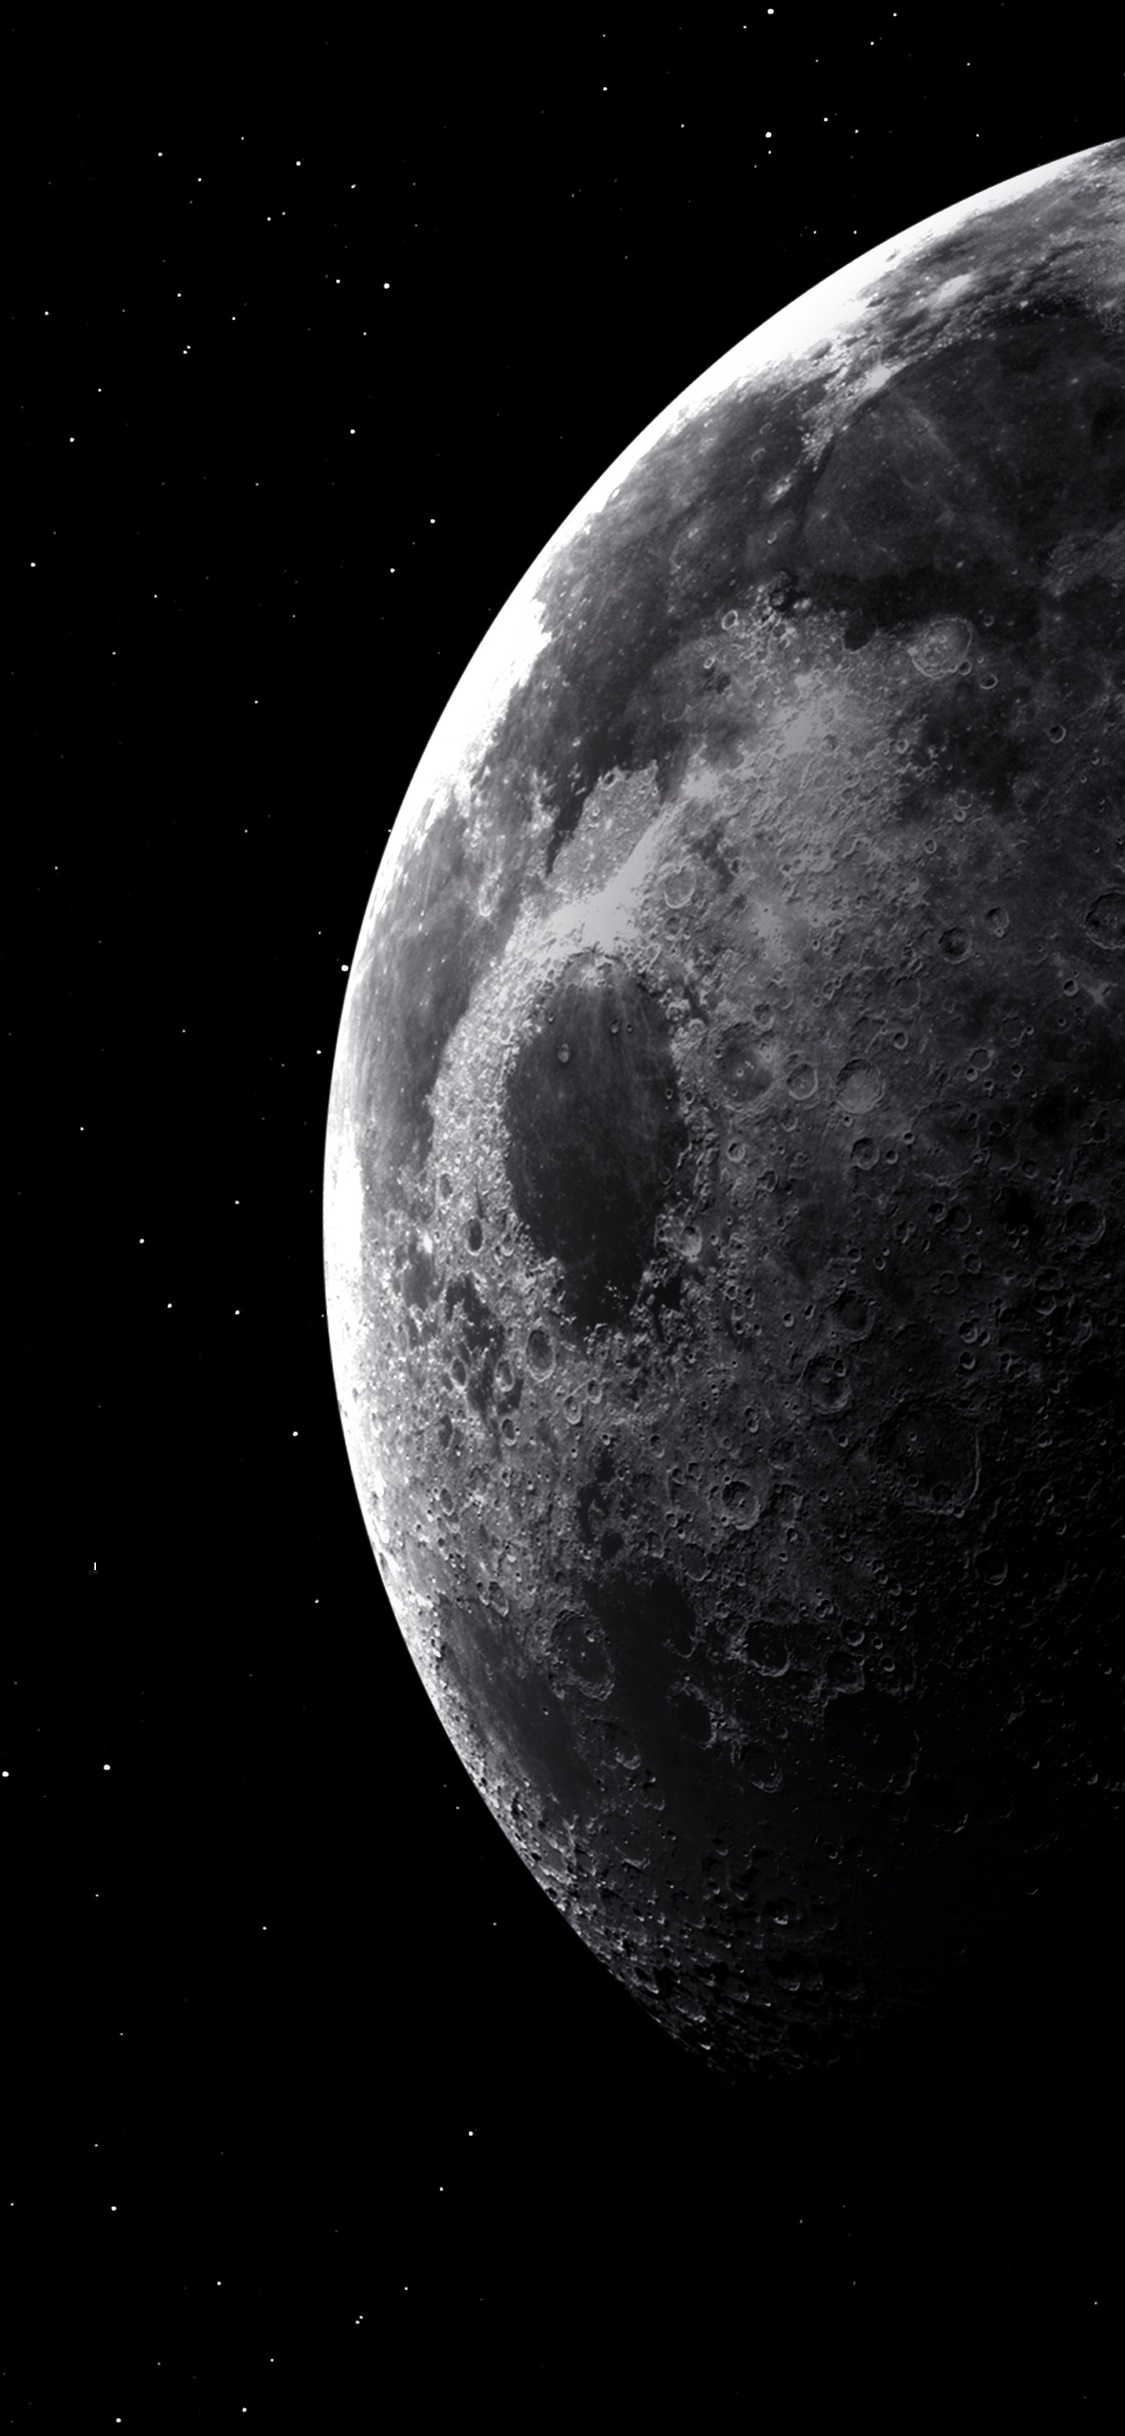 moon wallpaper iphone,moon,photograph,astronomical object,celestial event,atmospheric phenomenon